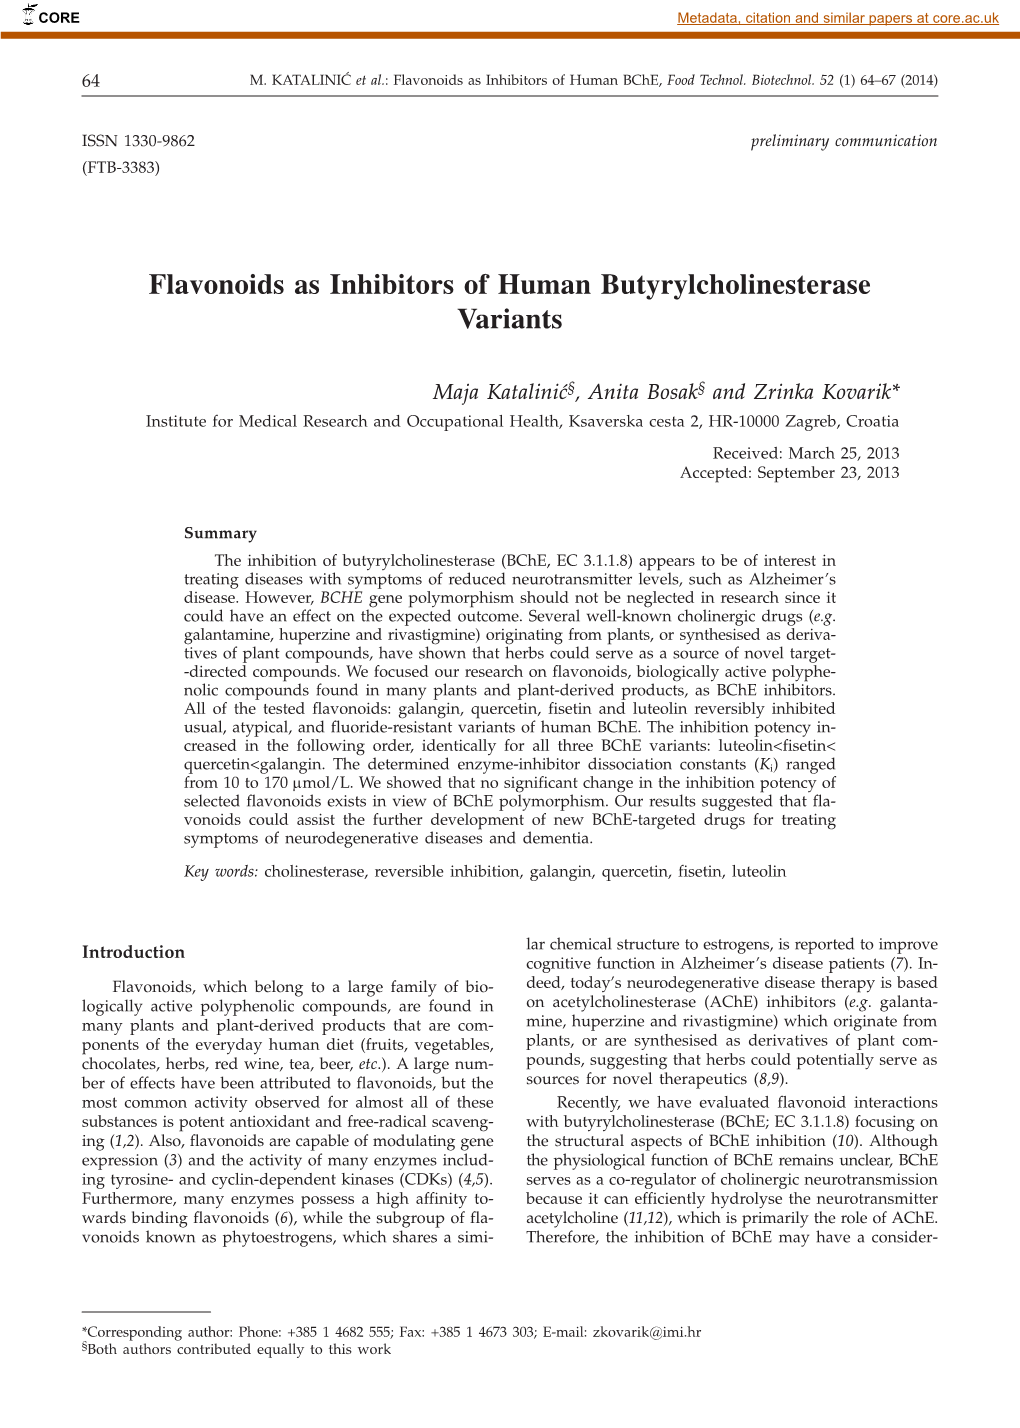 Flavonoids As Inhibitors of Human Butyrylcholinesterase Variants